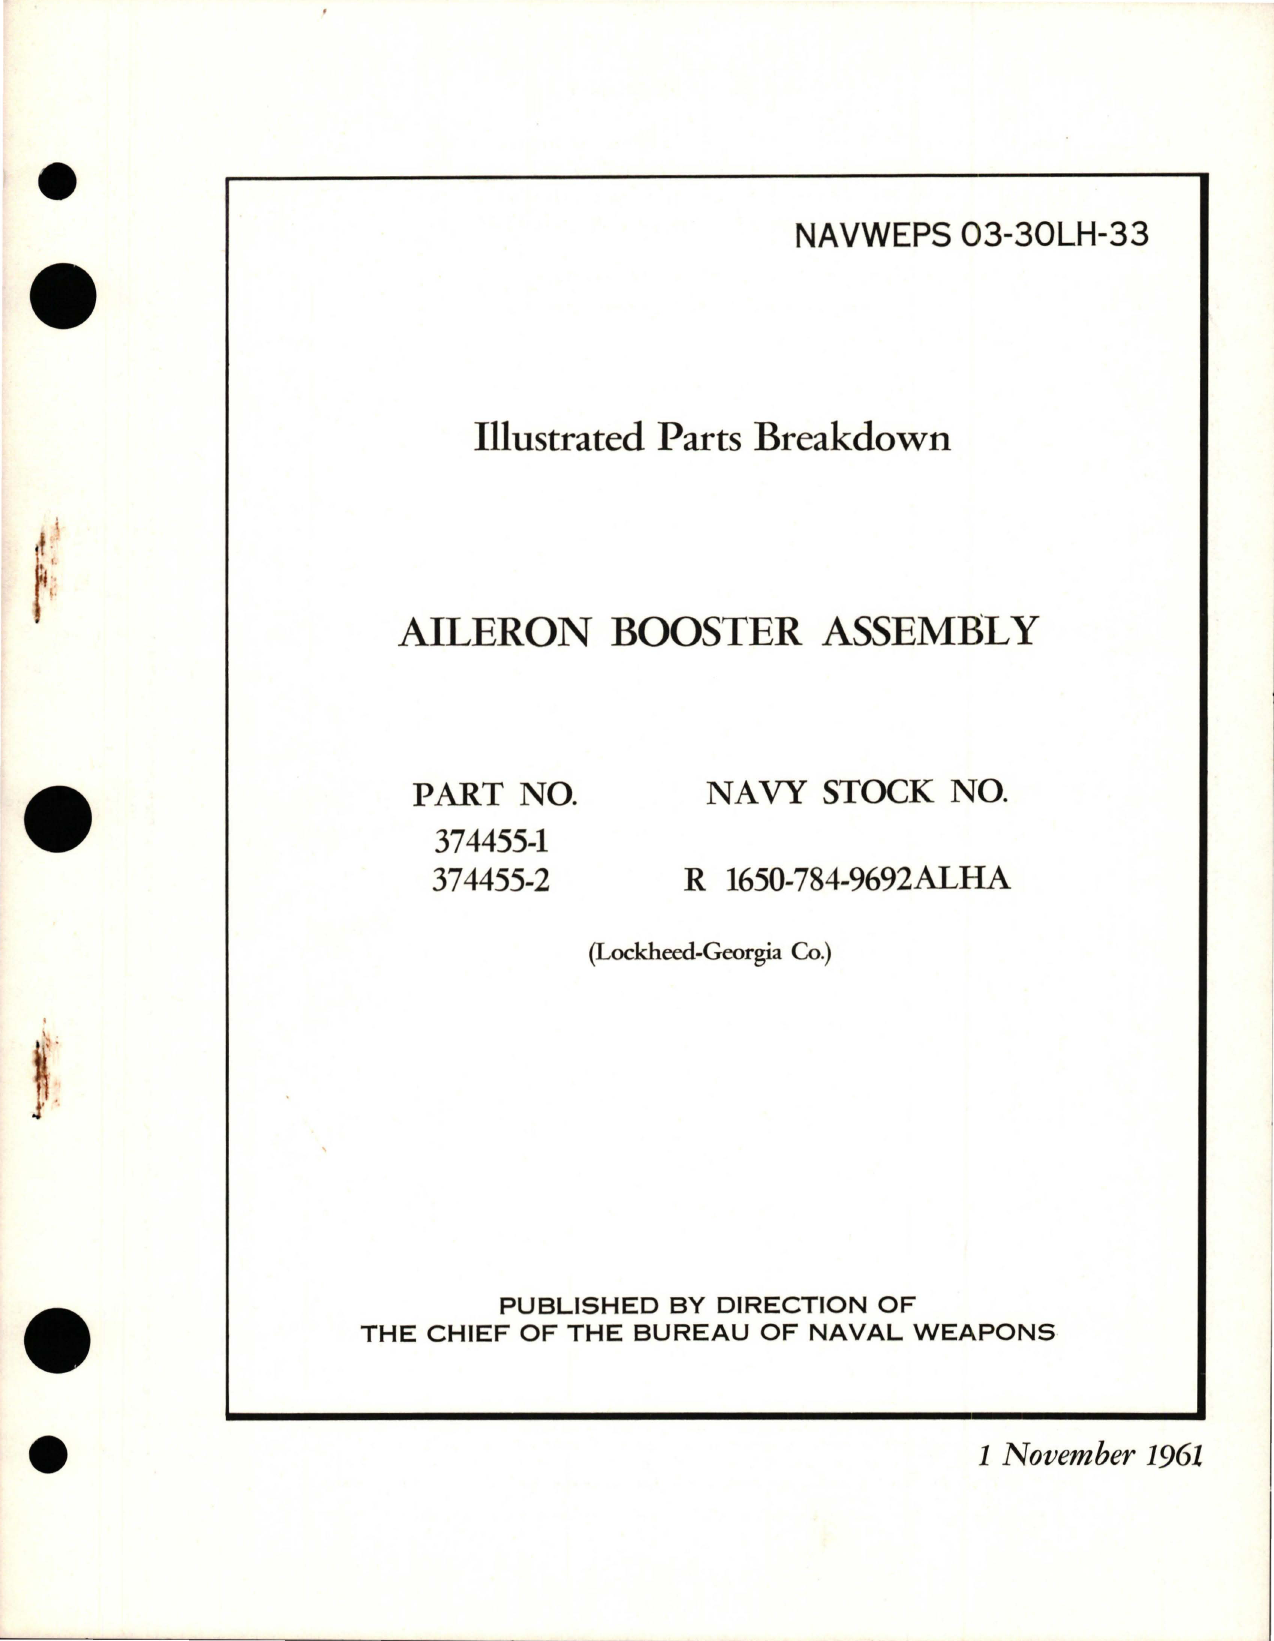 Sample page 1 from AirCorps Library document: Illustrated Parts Breakdown for Aileron Booster Assembly - Parts 374455-1 and 374455-2